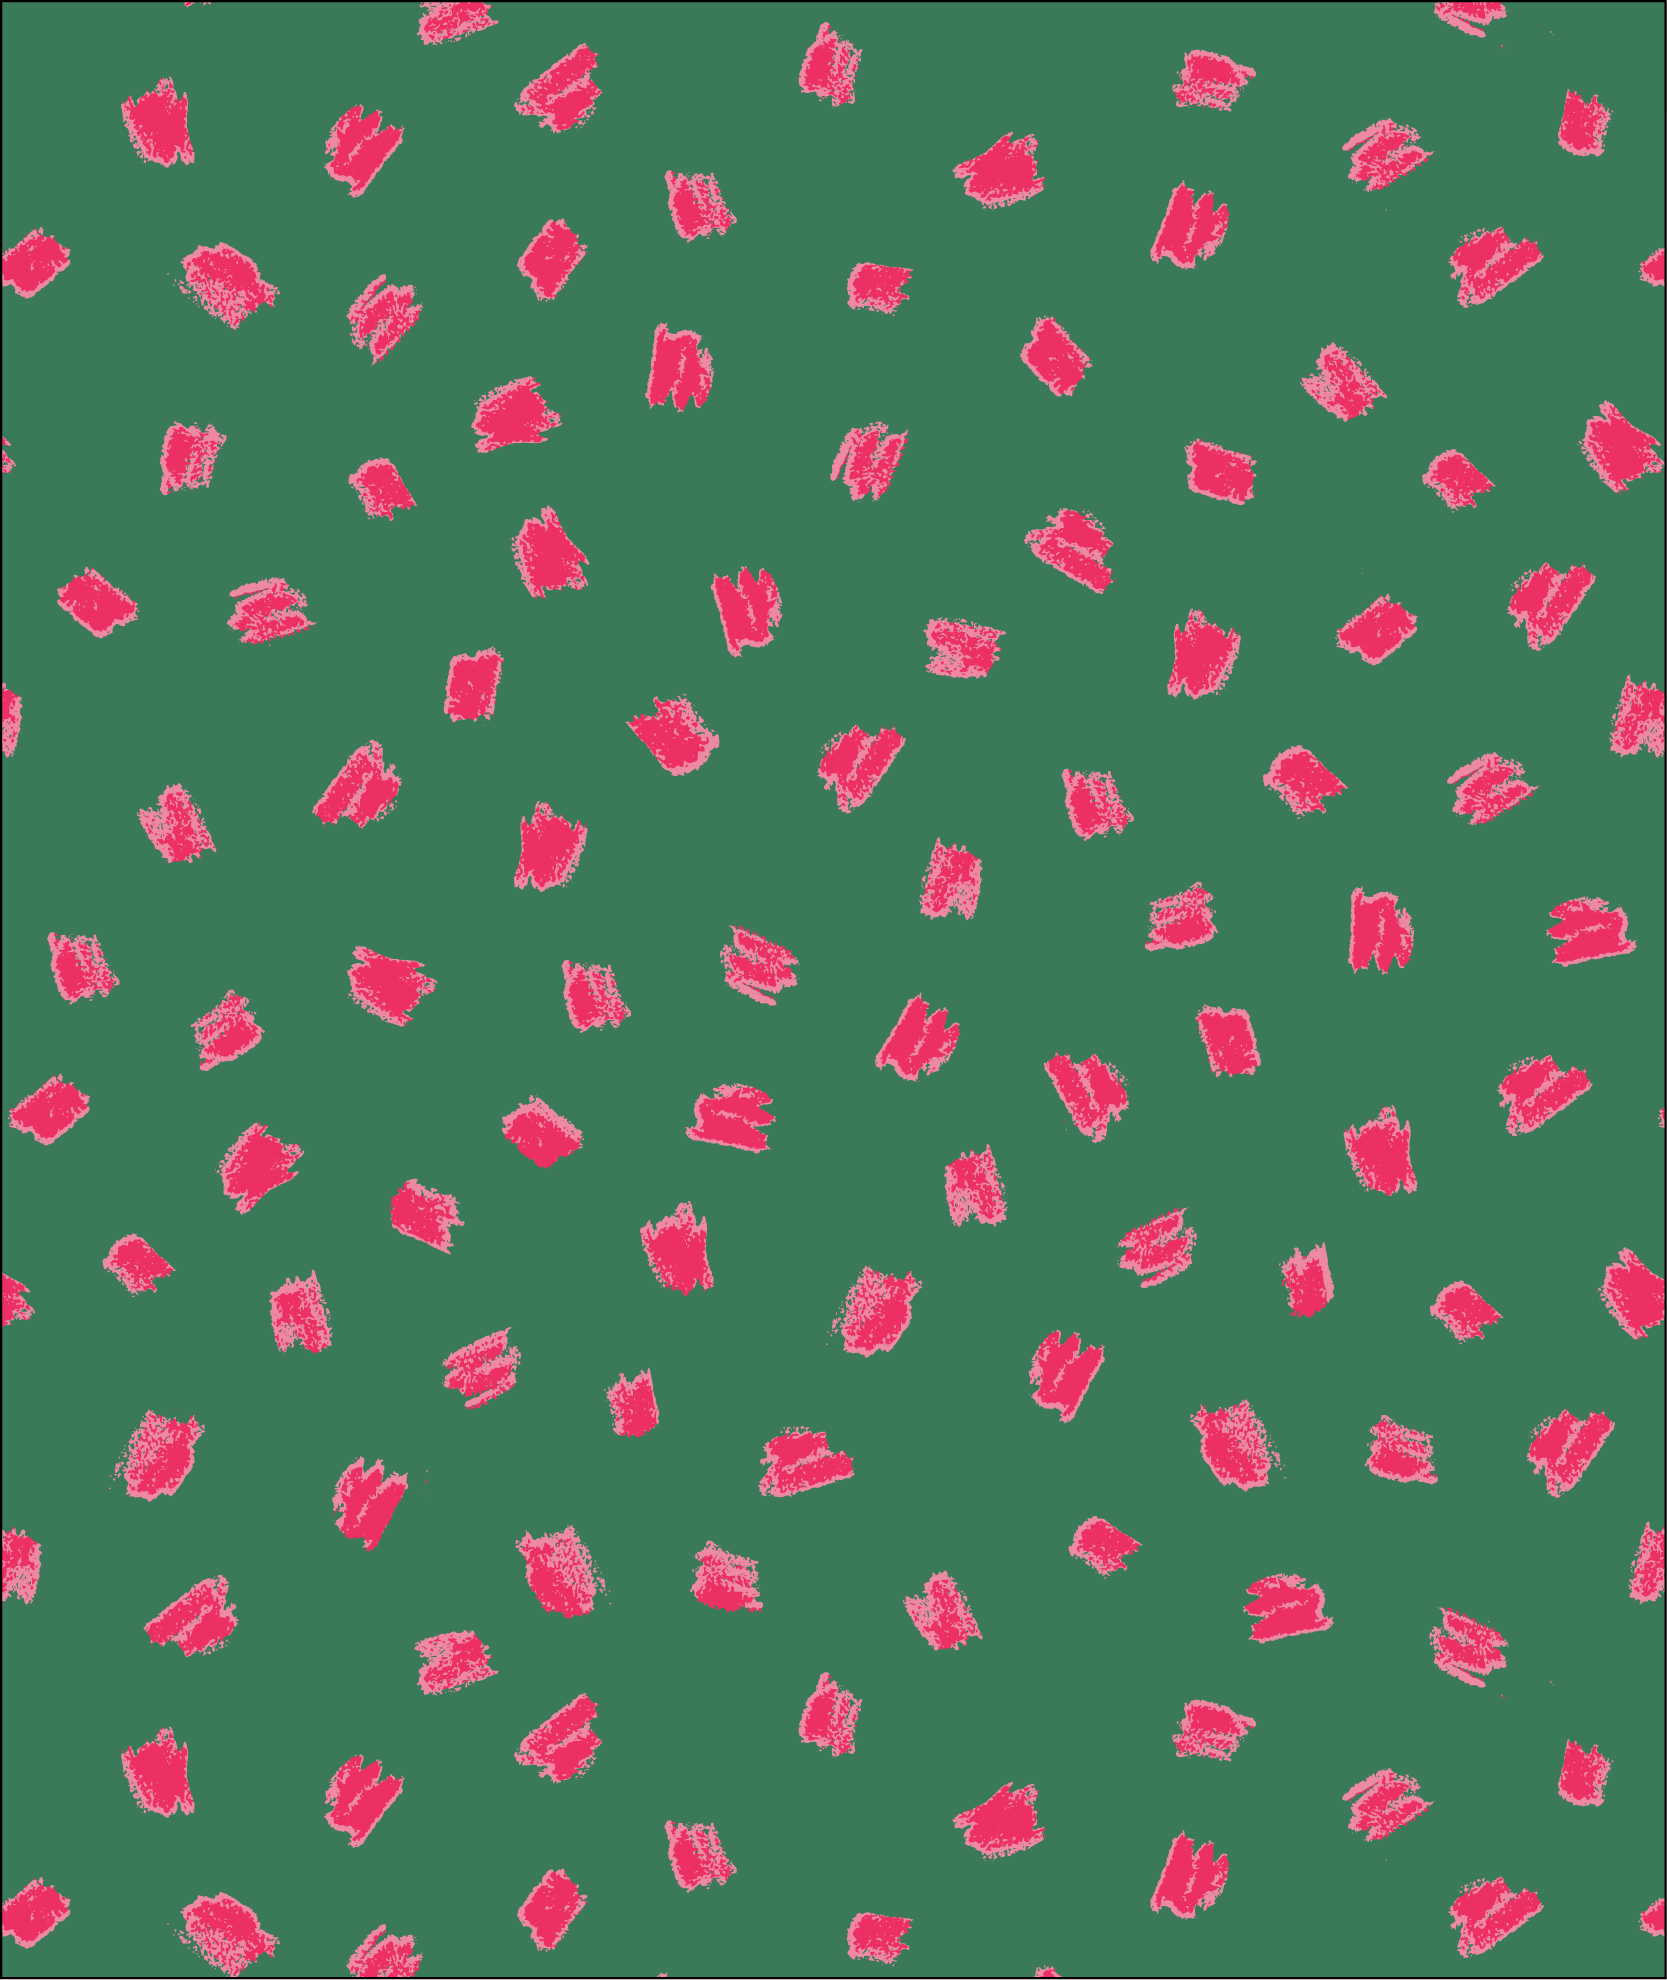 Country Walks- Specks in pinks on green background